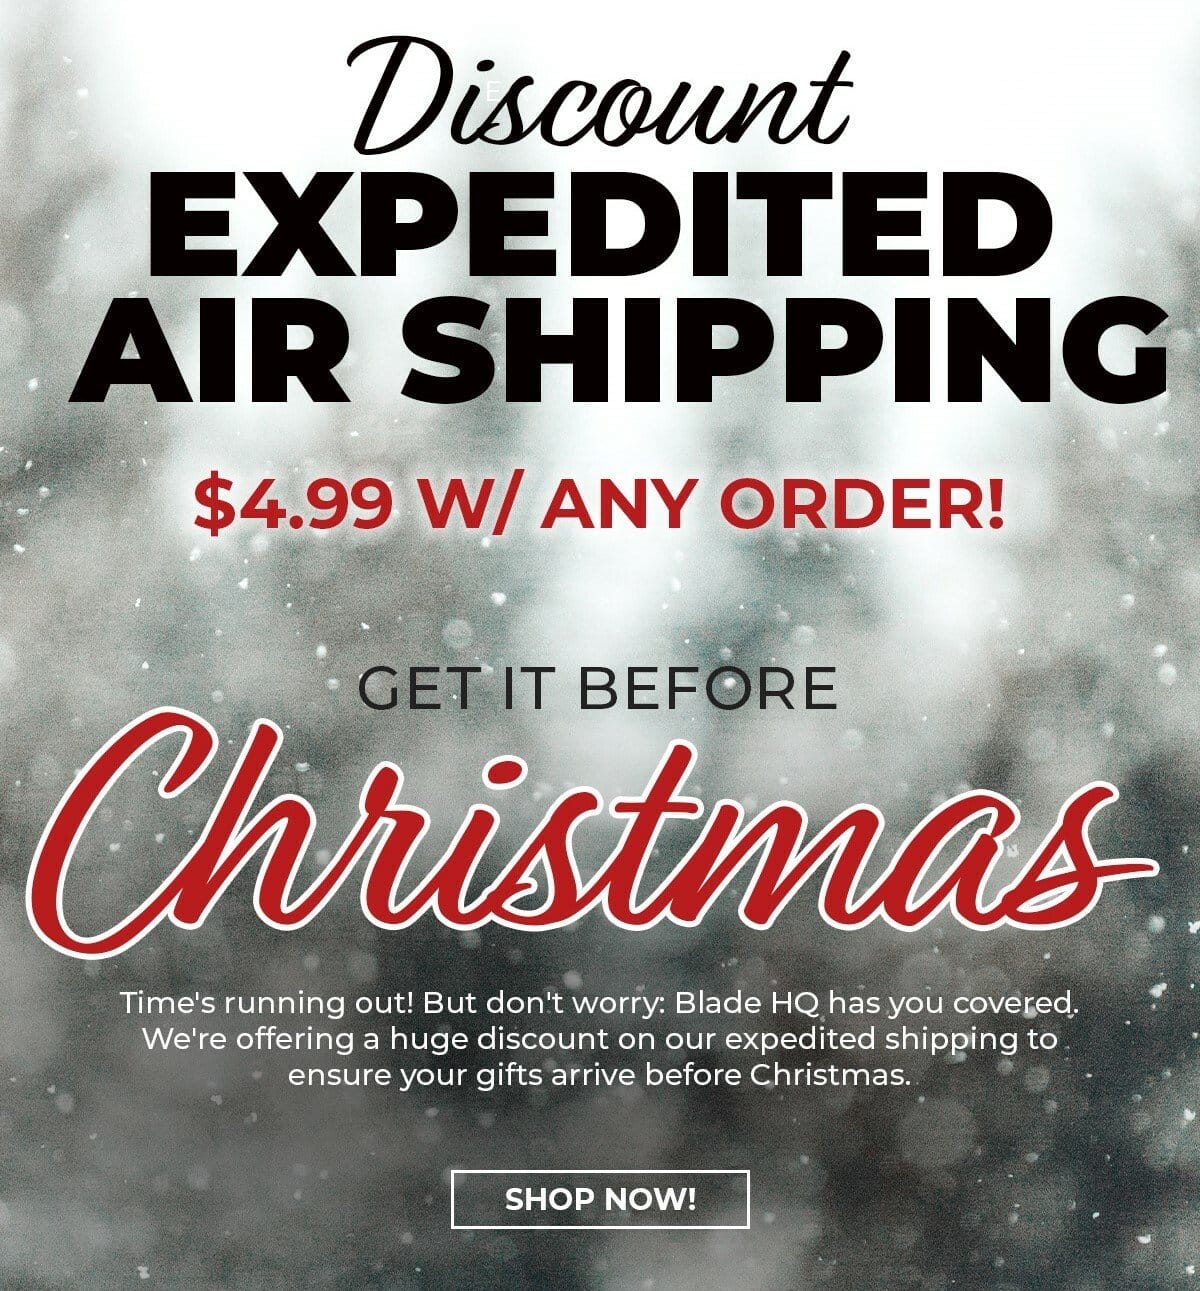 Discounted Expedited Shipping!